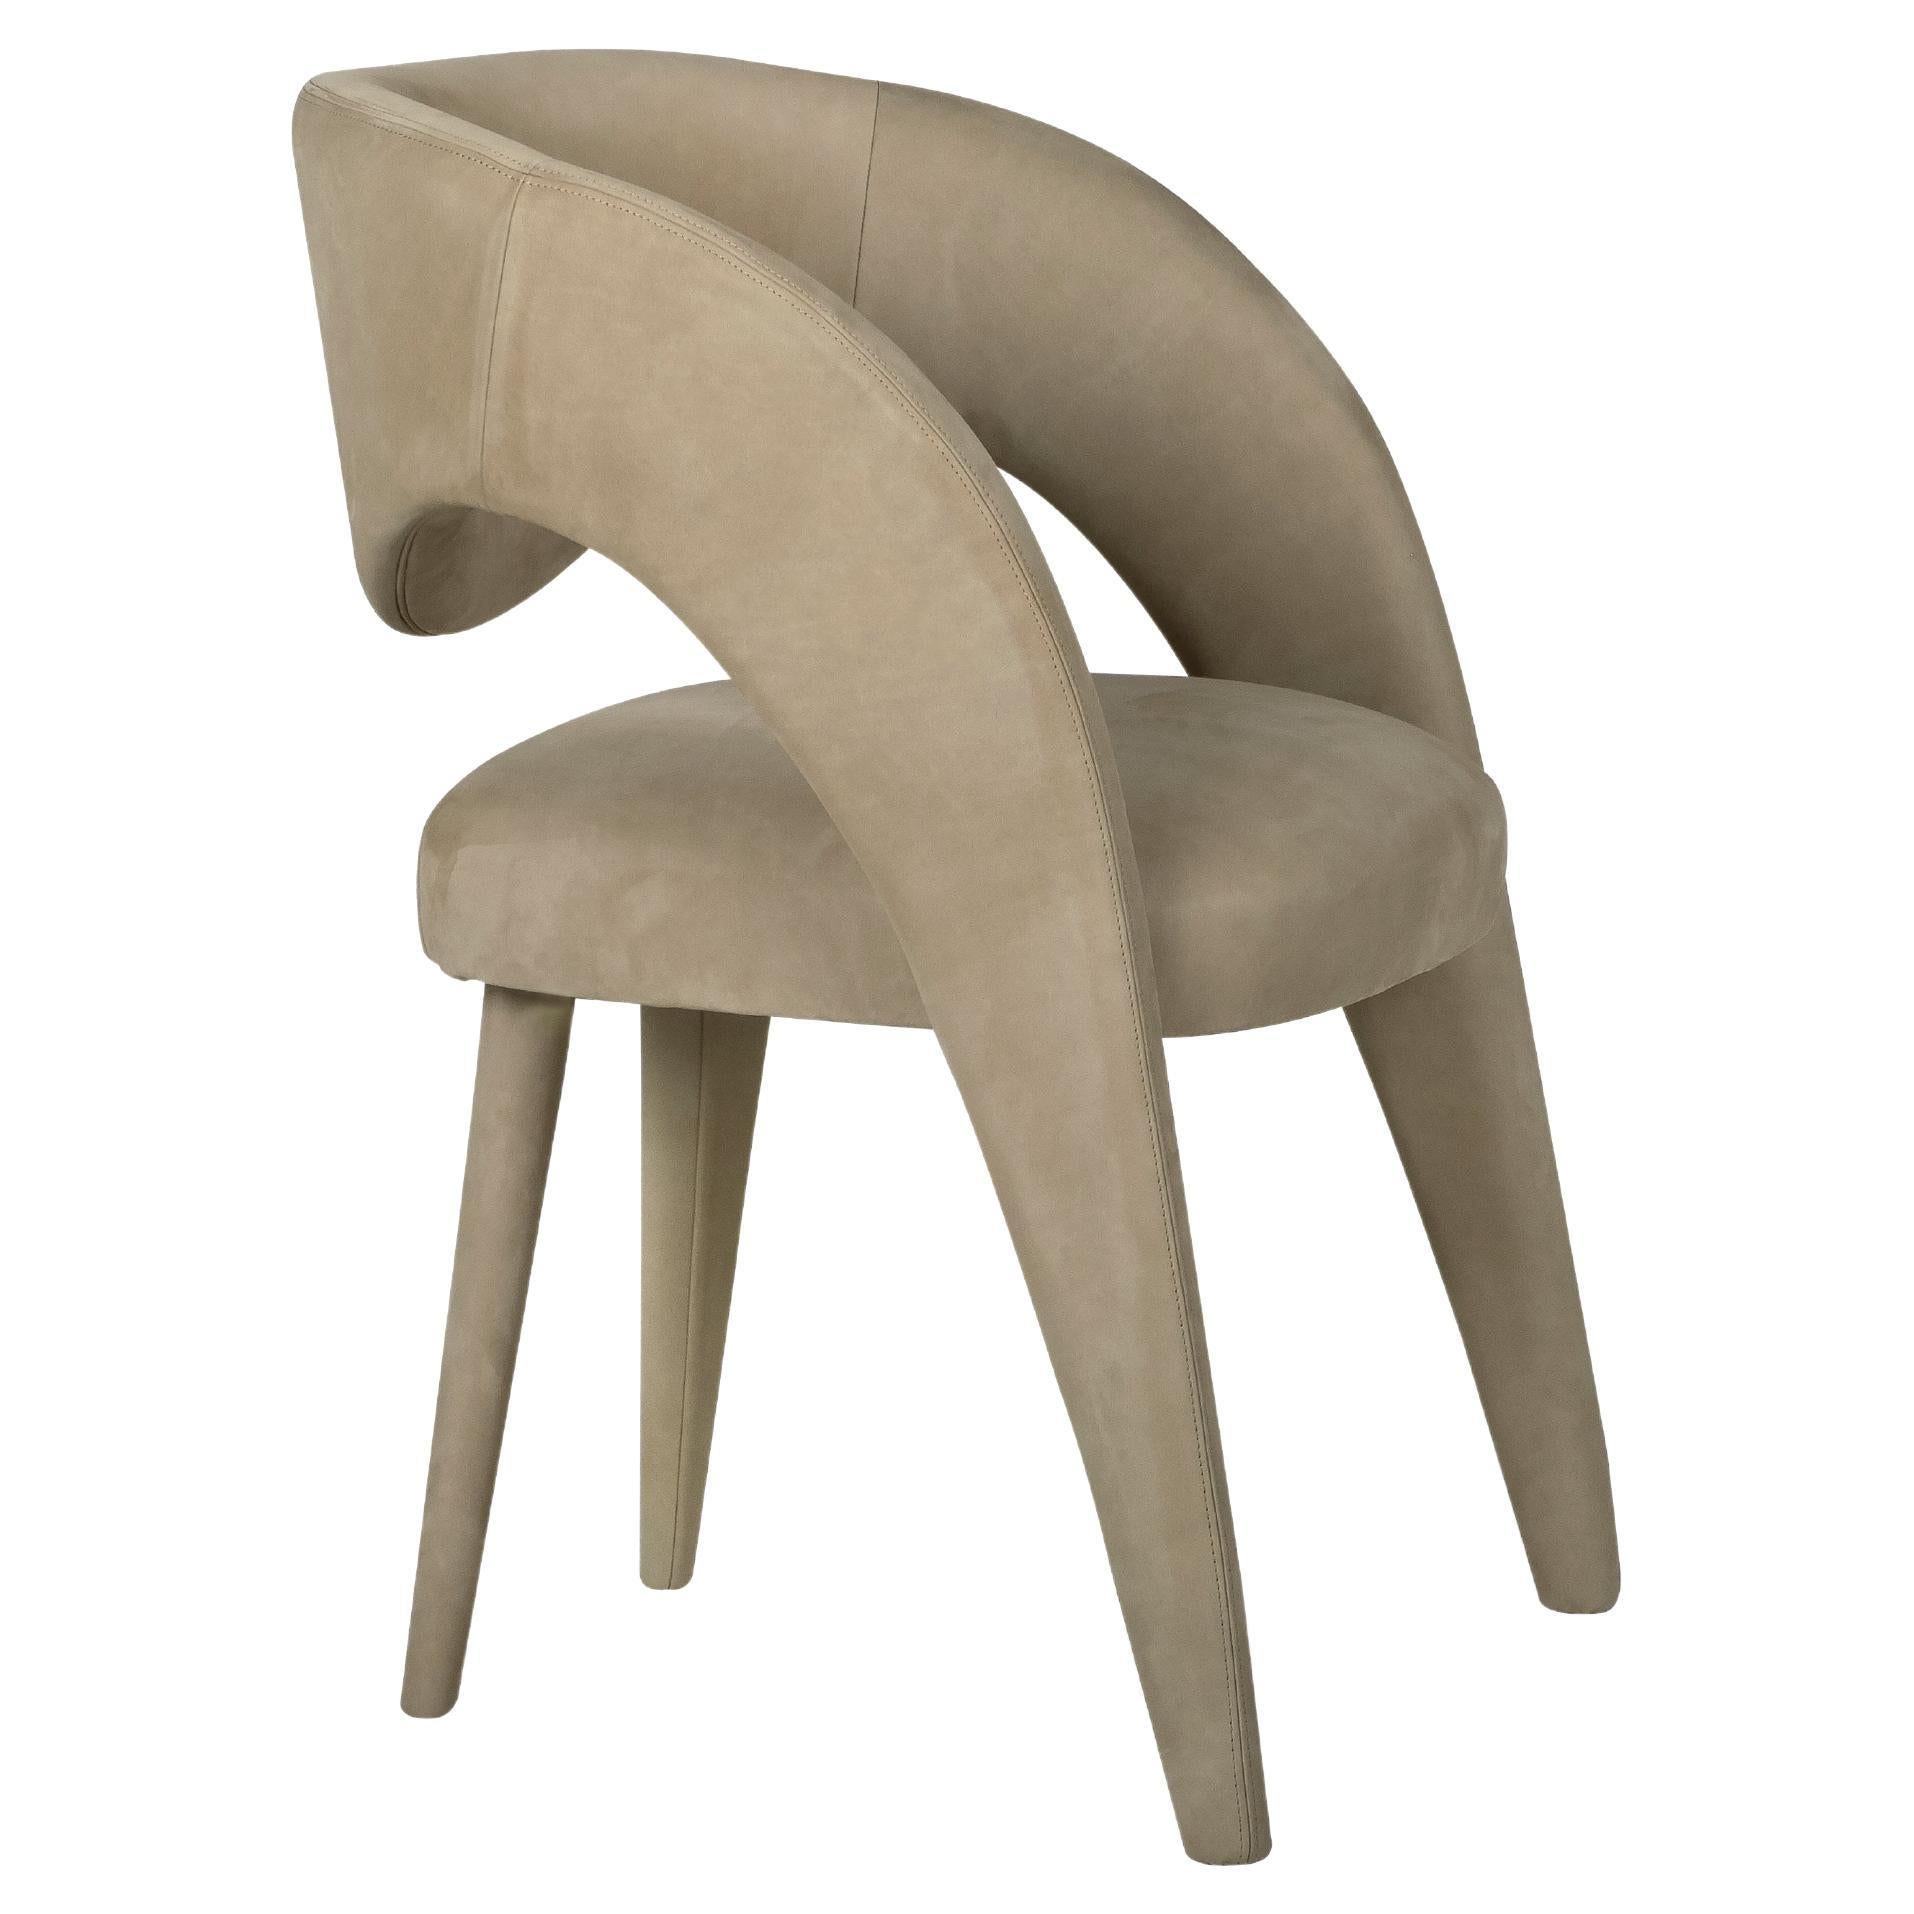 Modern Laurence Chair Upholstered in Nubuck Leather Handcrafted by Greenapple